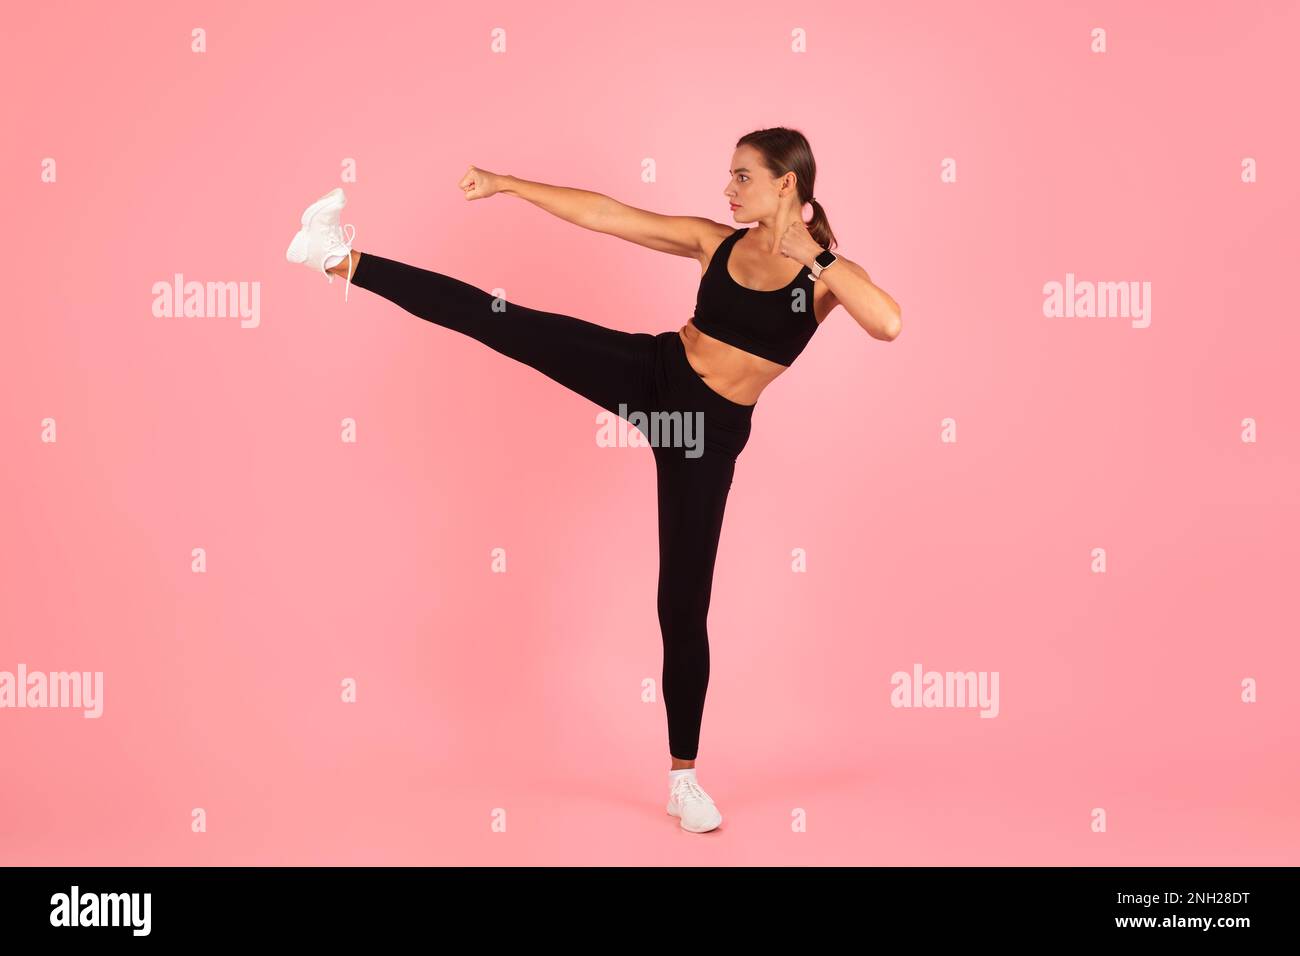 Motivated Young Woman Doing Karate Side Kick Move On Pink Studio Background Stock Photo